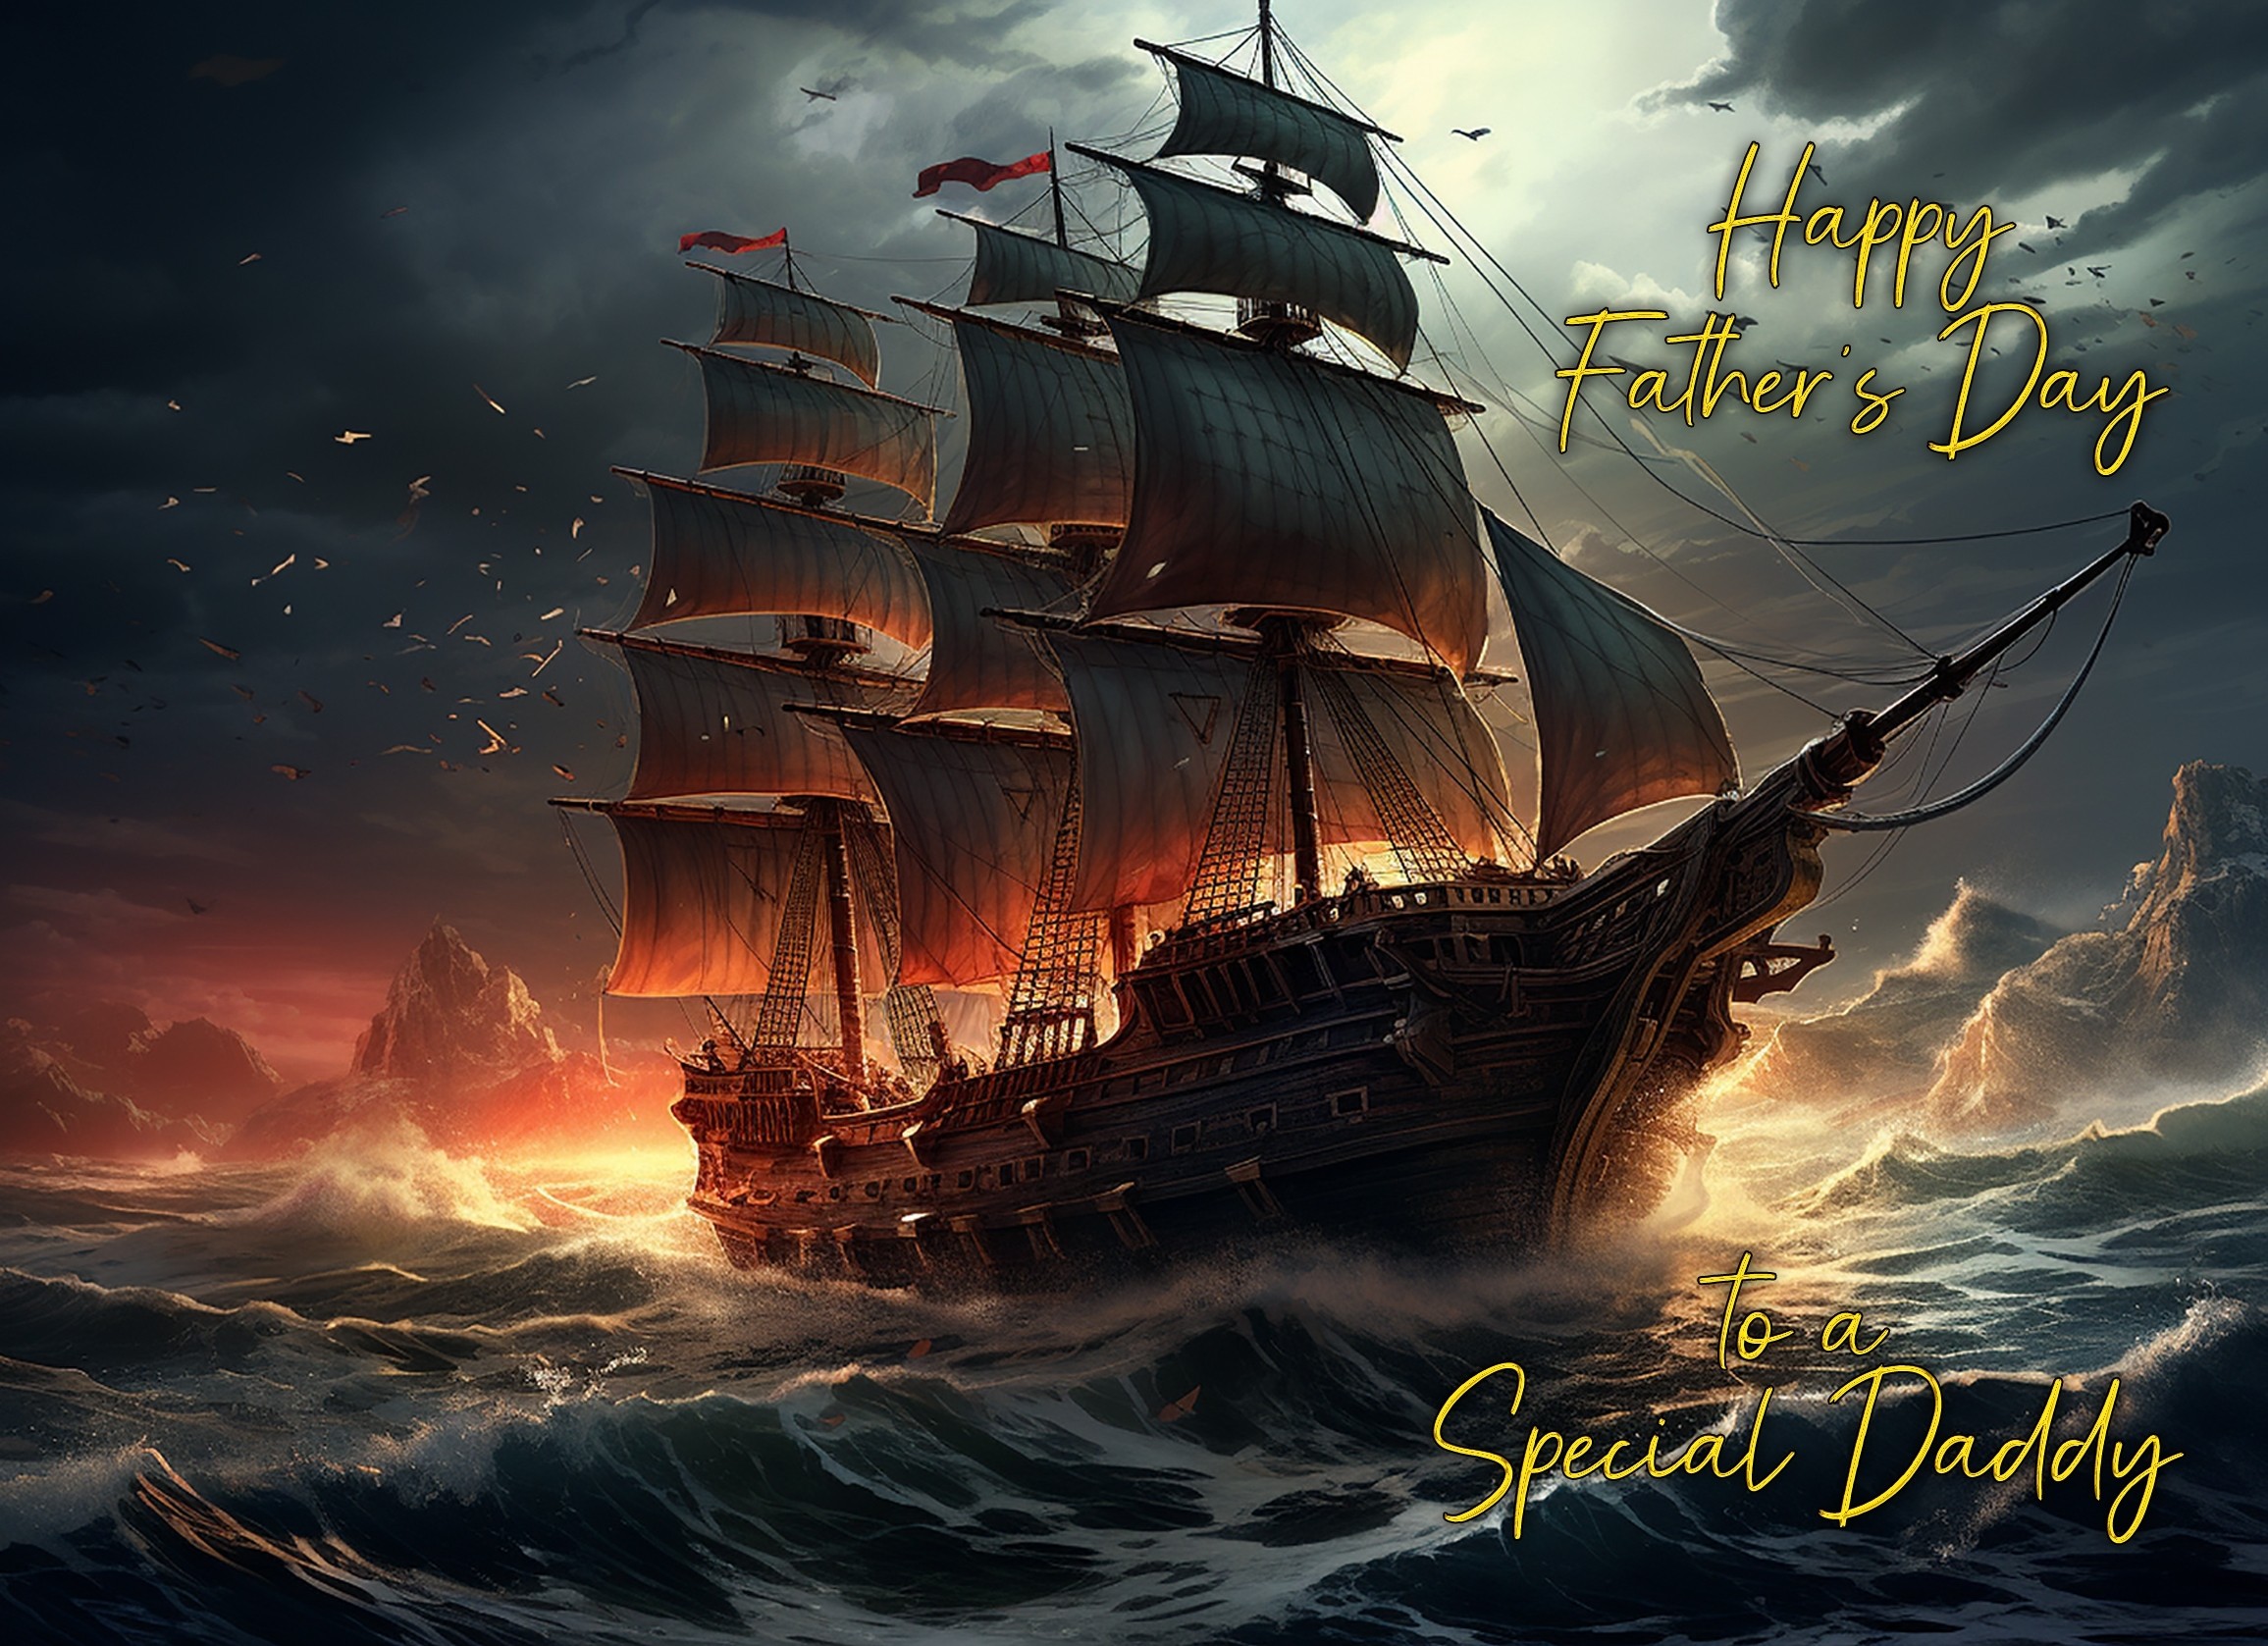 Ship Scenery Art Fathers Day Card For Daddy (Design 2)